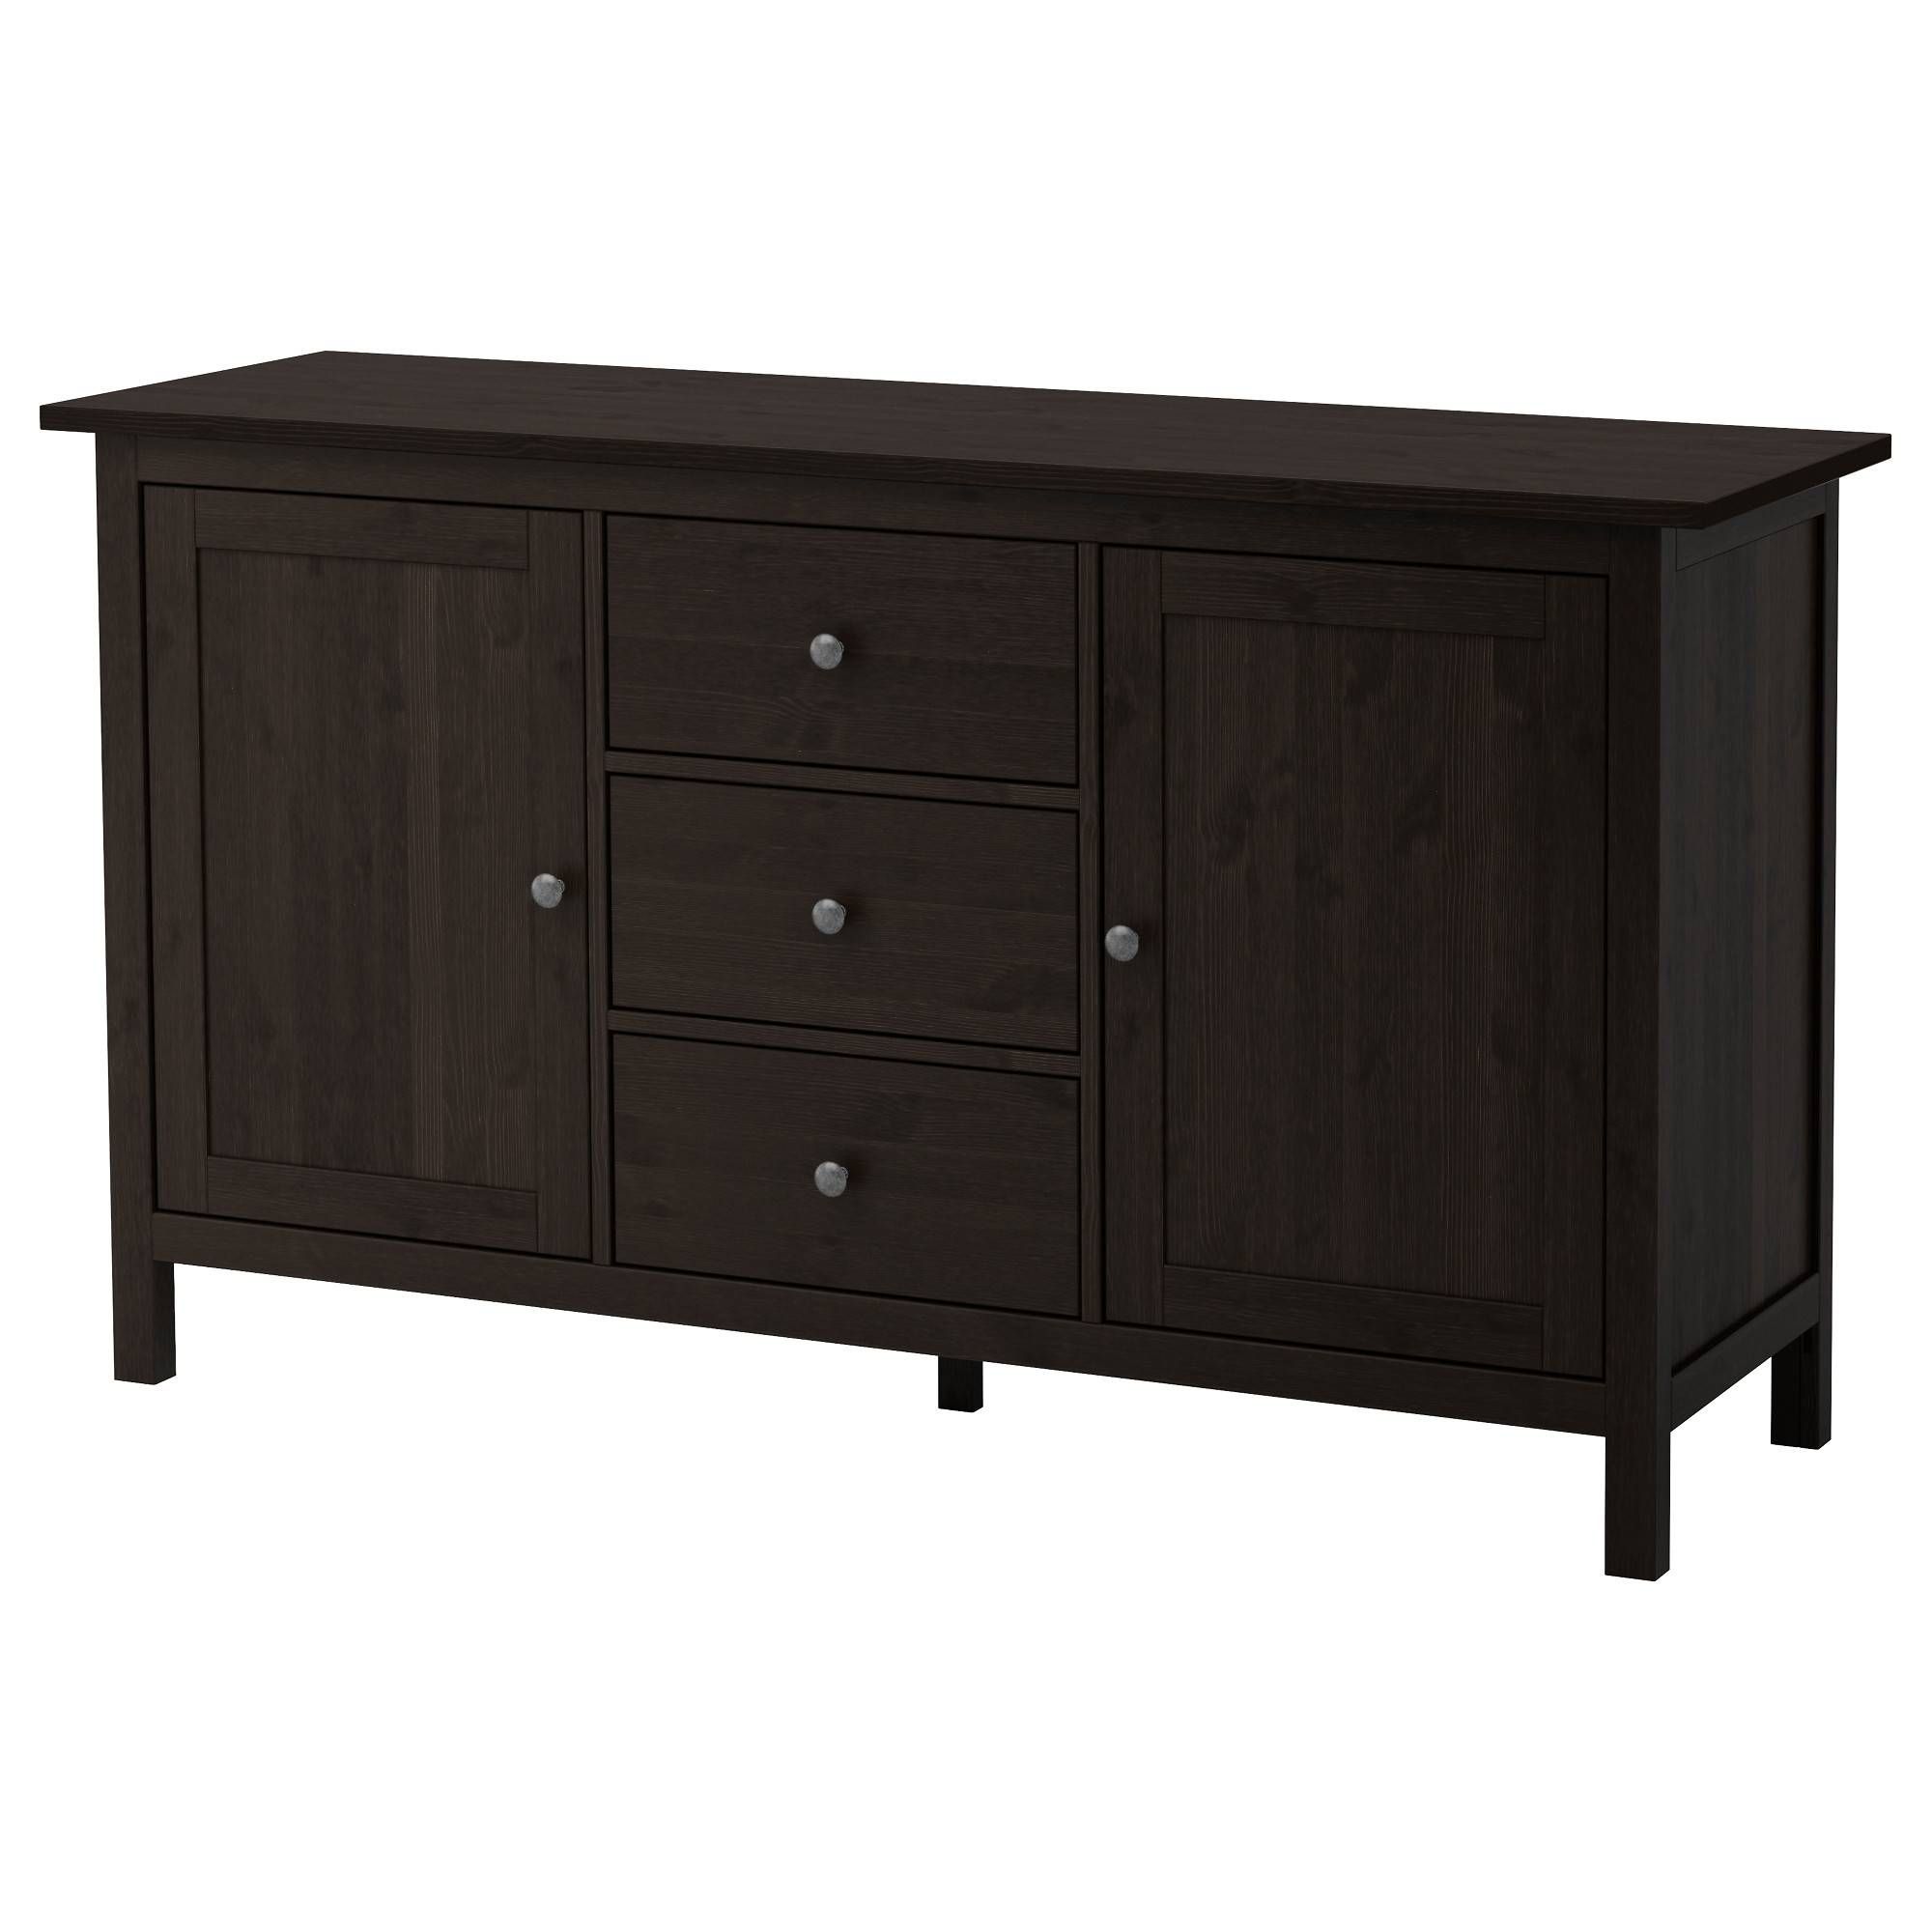 Hemnes Sideboard Black Brown 157x88 Cm – Ikea In Sideboards And Buffets Ikea (View 5 of 15)